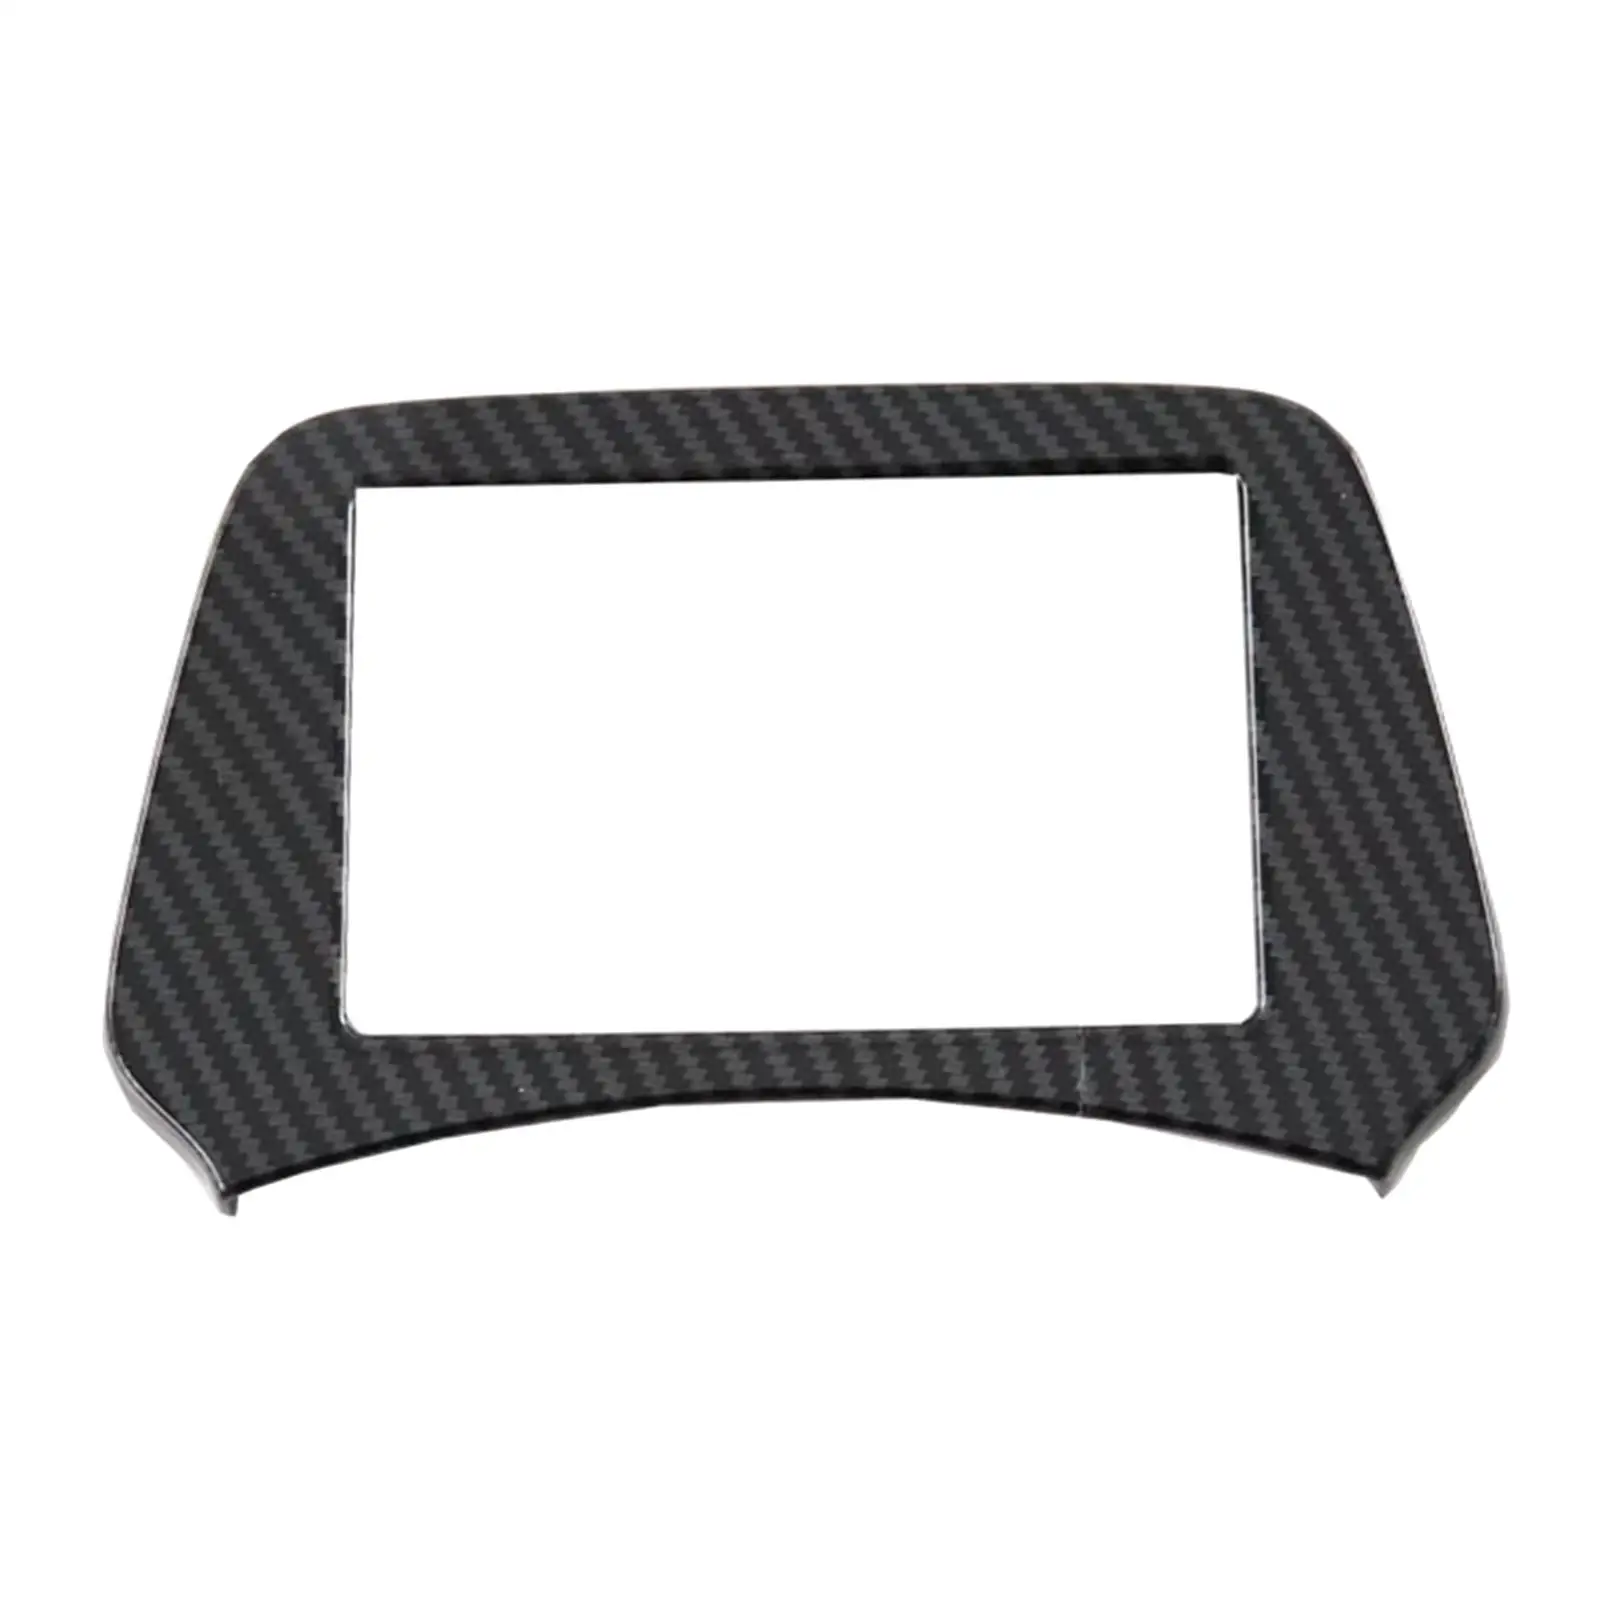 Dial Dashboard Trim Cover Frame Accessory Practical Easy to Install Durable Car